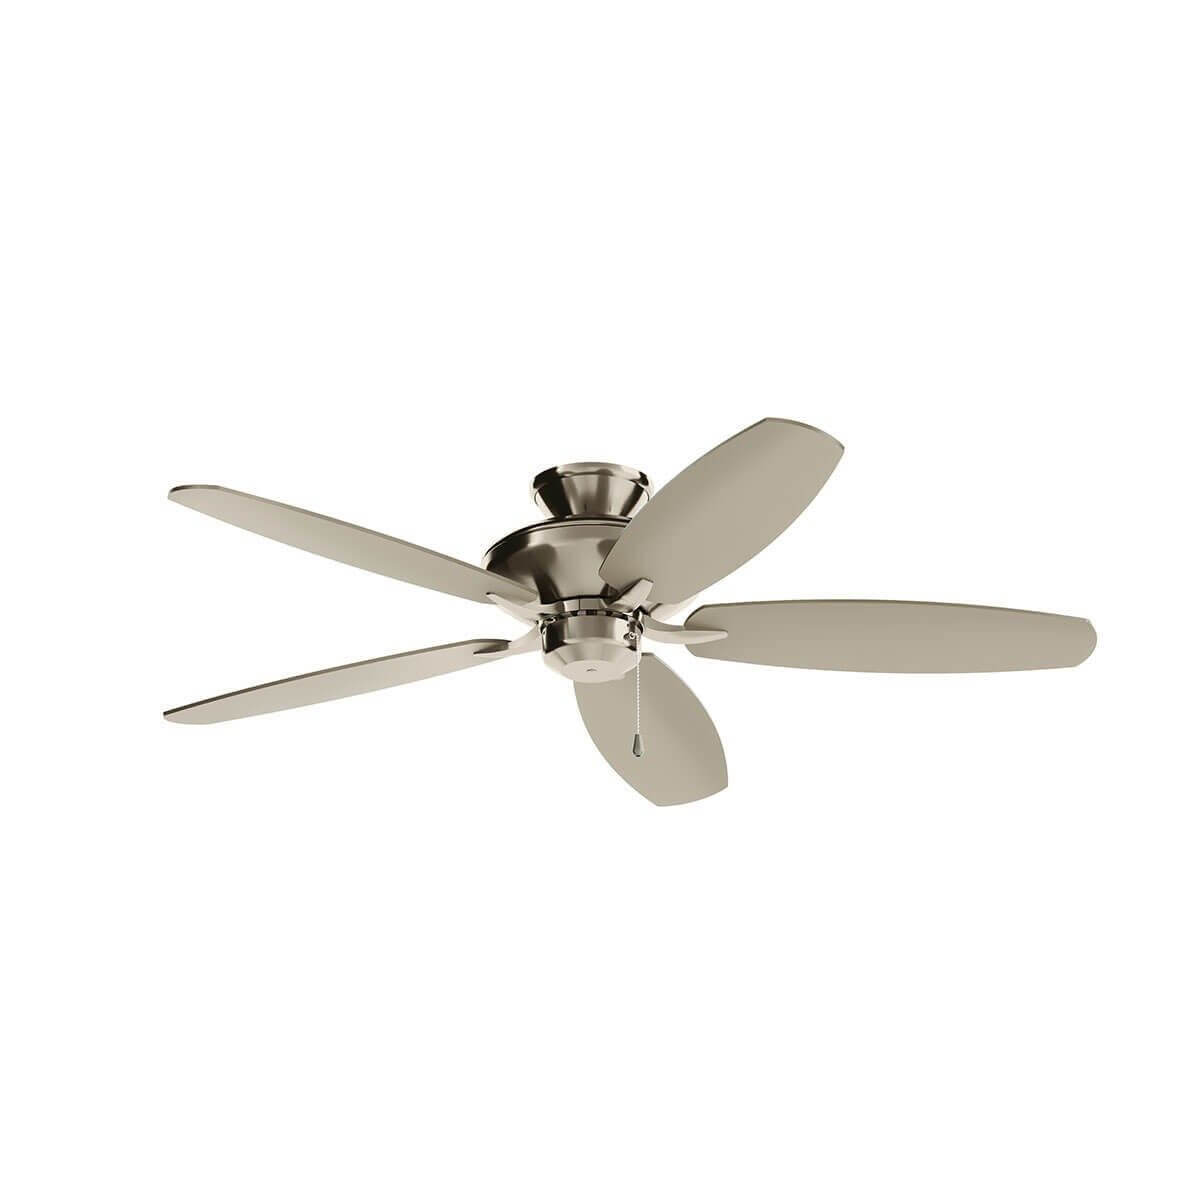 Kichler 330160BSS Renew 52 inch 5 Blade Pull Chain Ceiling Fan in Brushed Stainless Steel